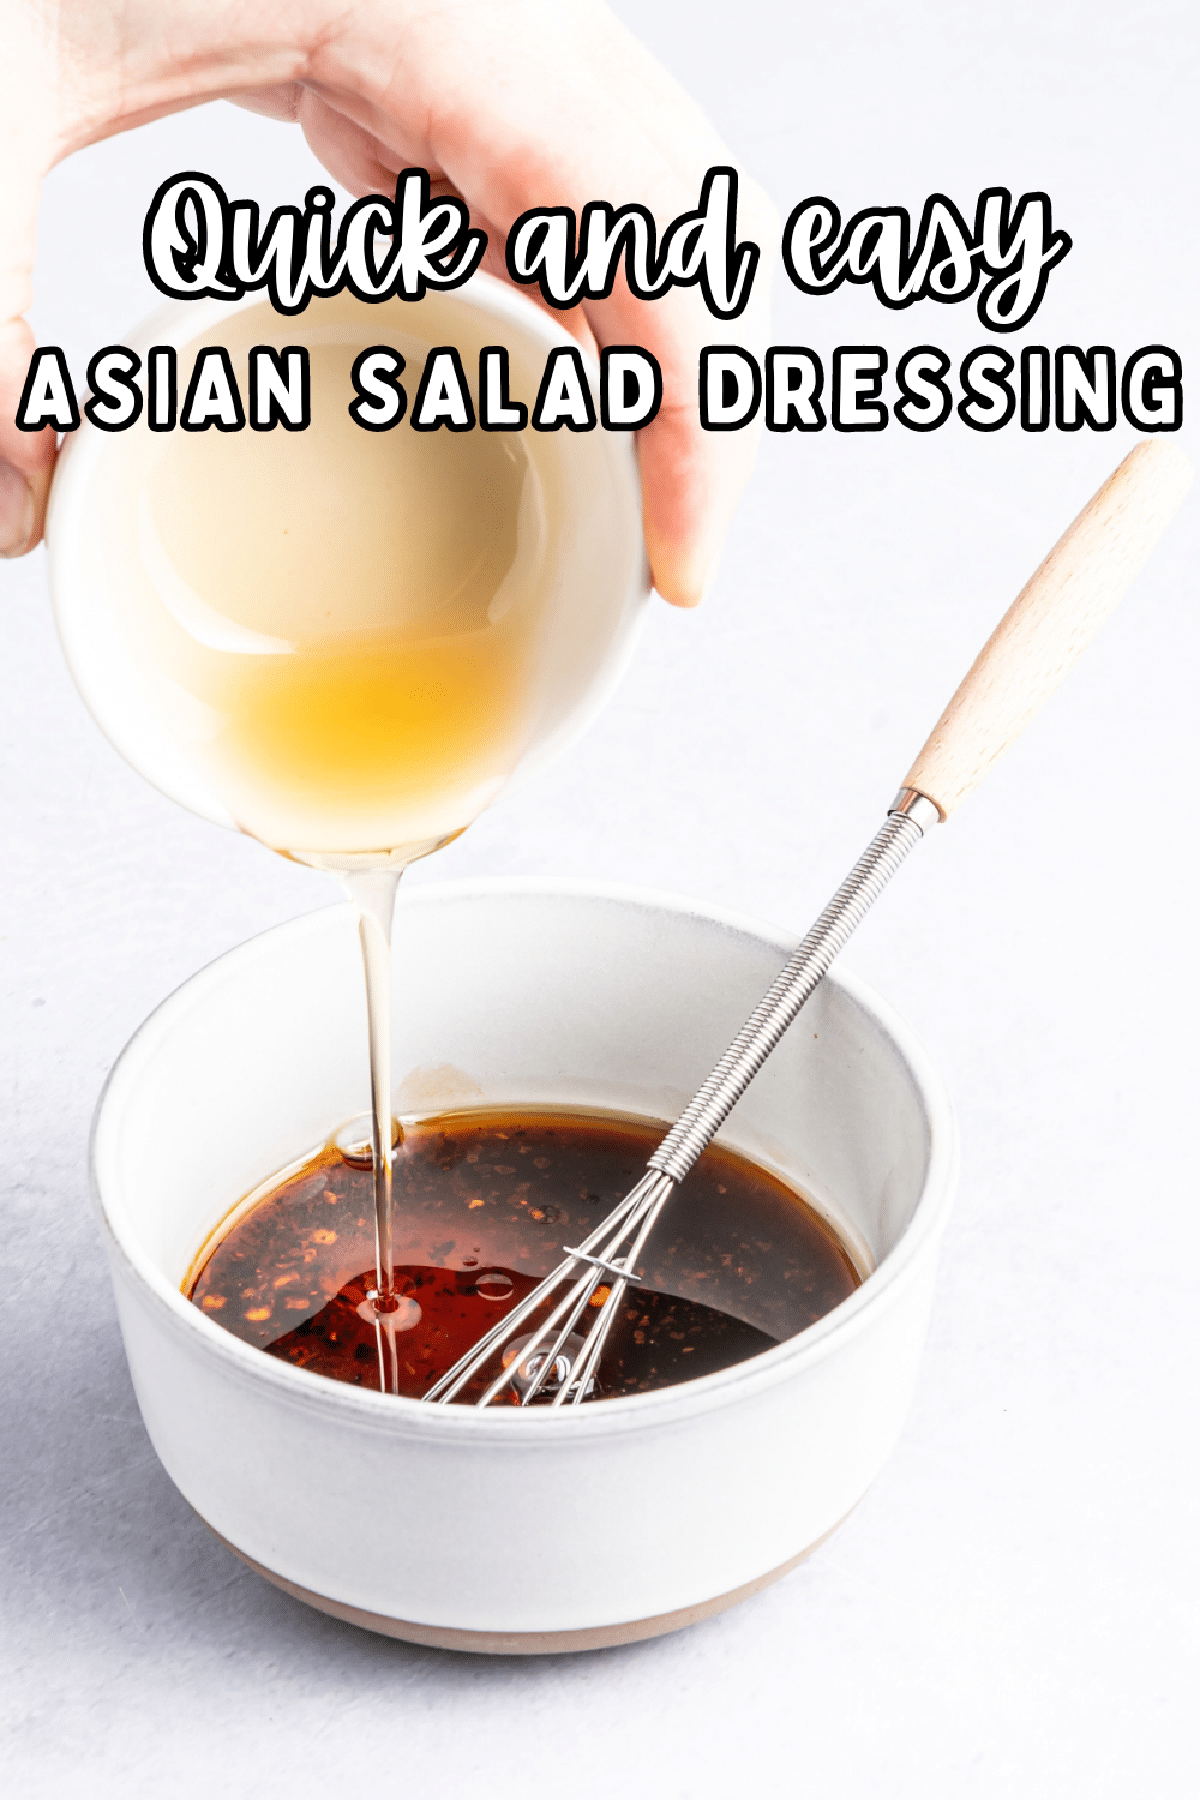 A white bowl of dark brown colored Asian salad dressing with a small whisk inside the bowl; a hand is pouring rice wine vinegar from a second bowl into the dressing.